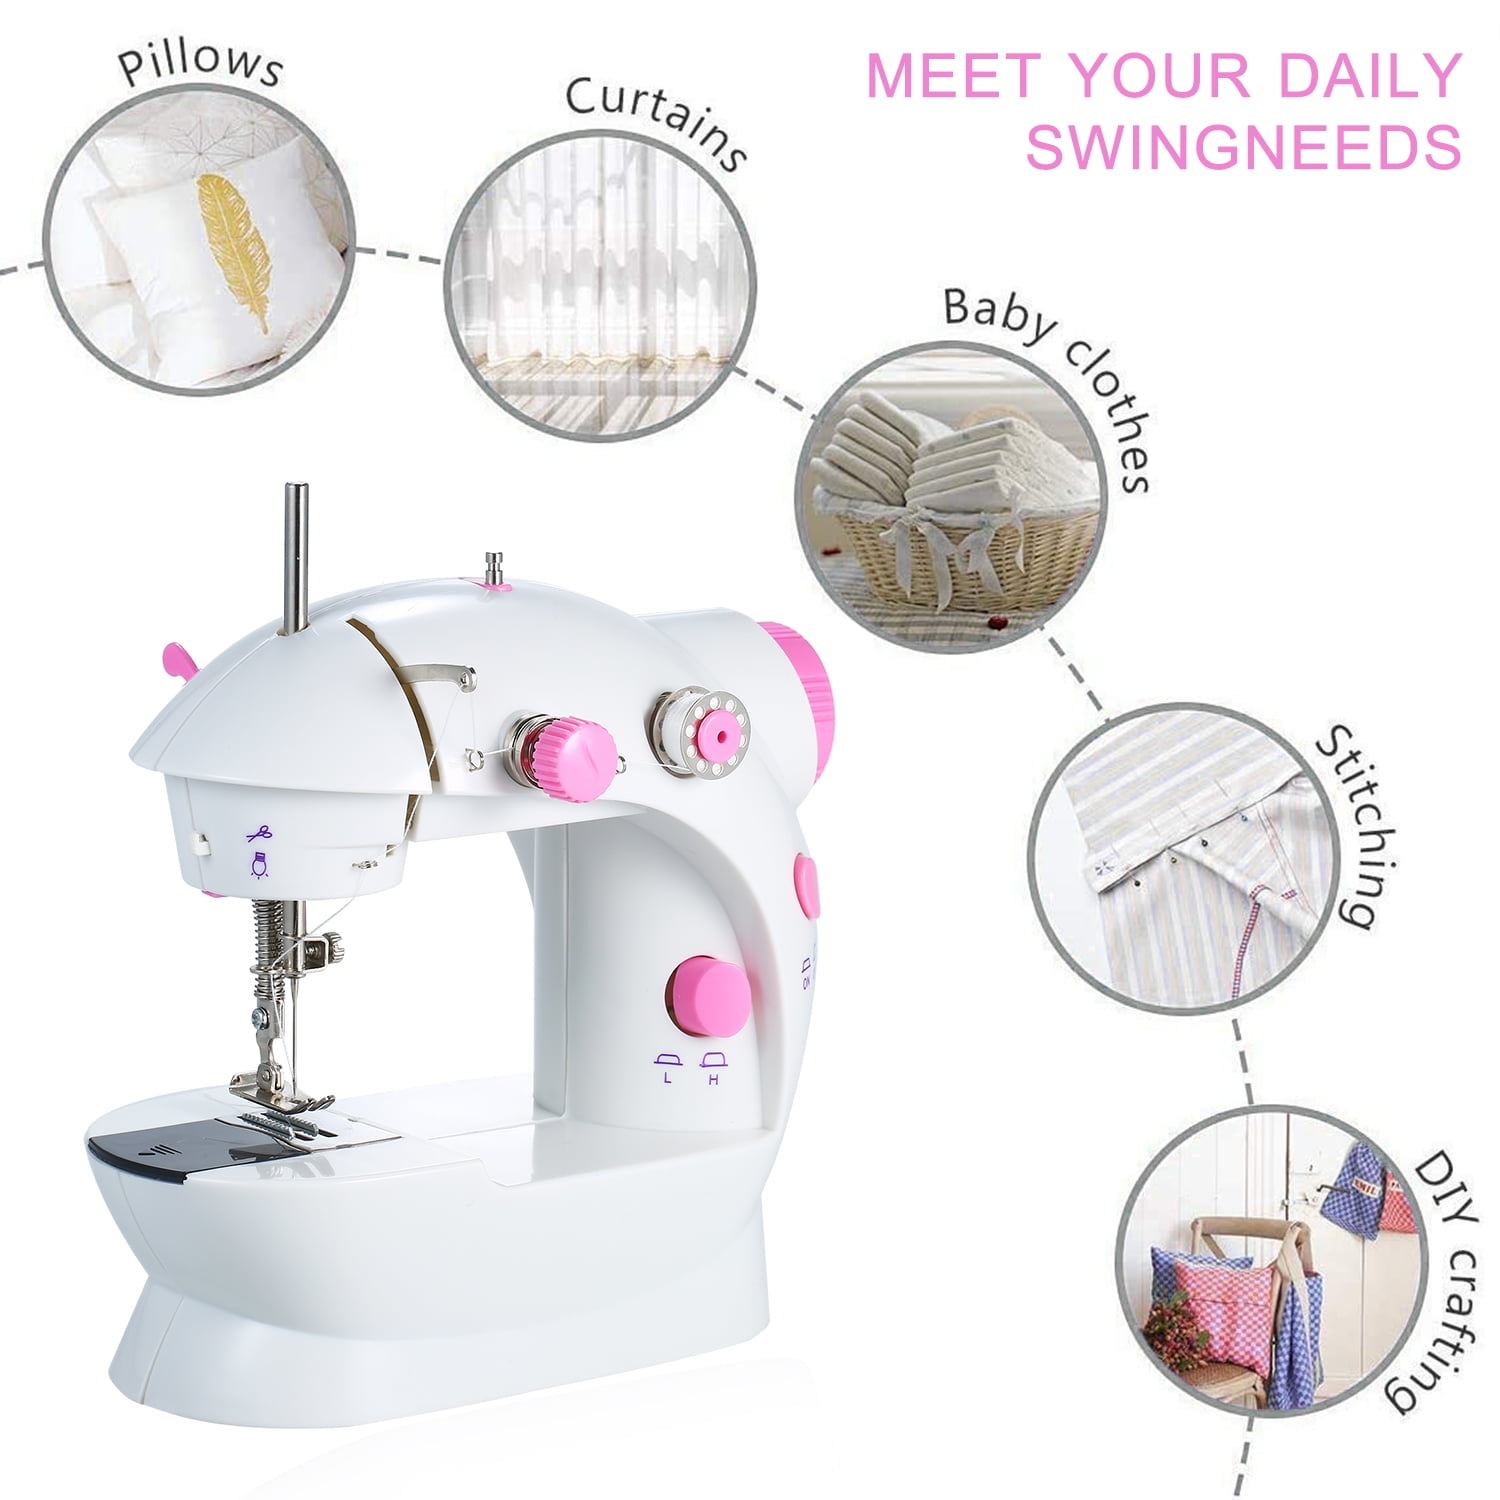 Buy hand sewing machine Online in Cayman Islands at Low Prices at